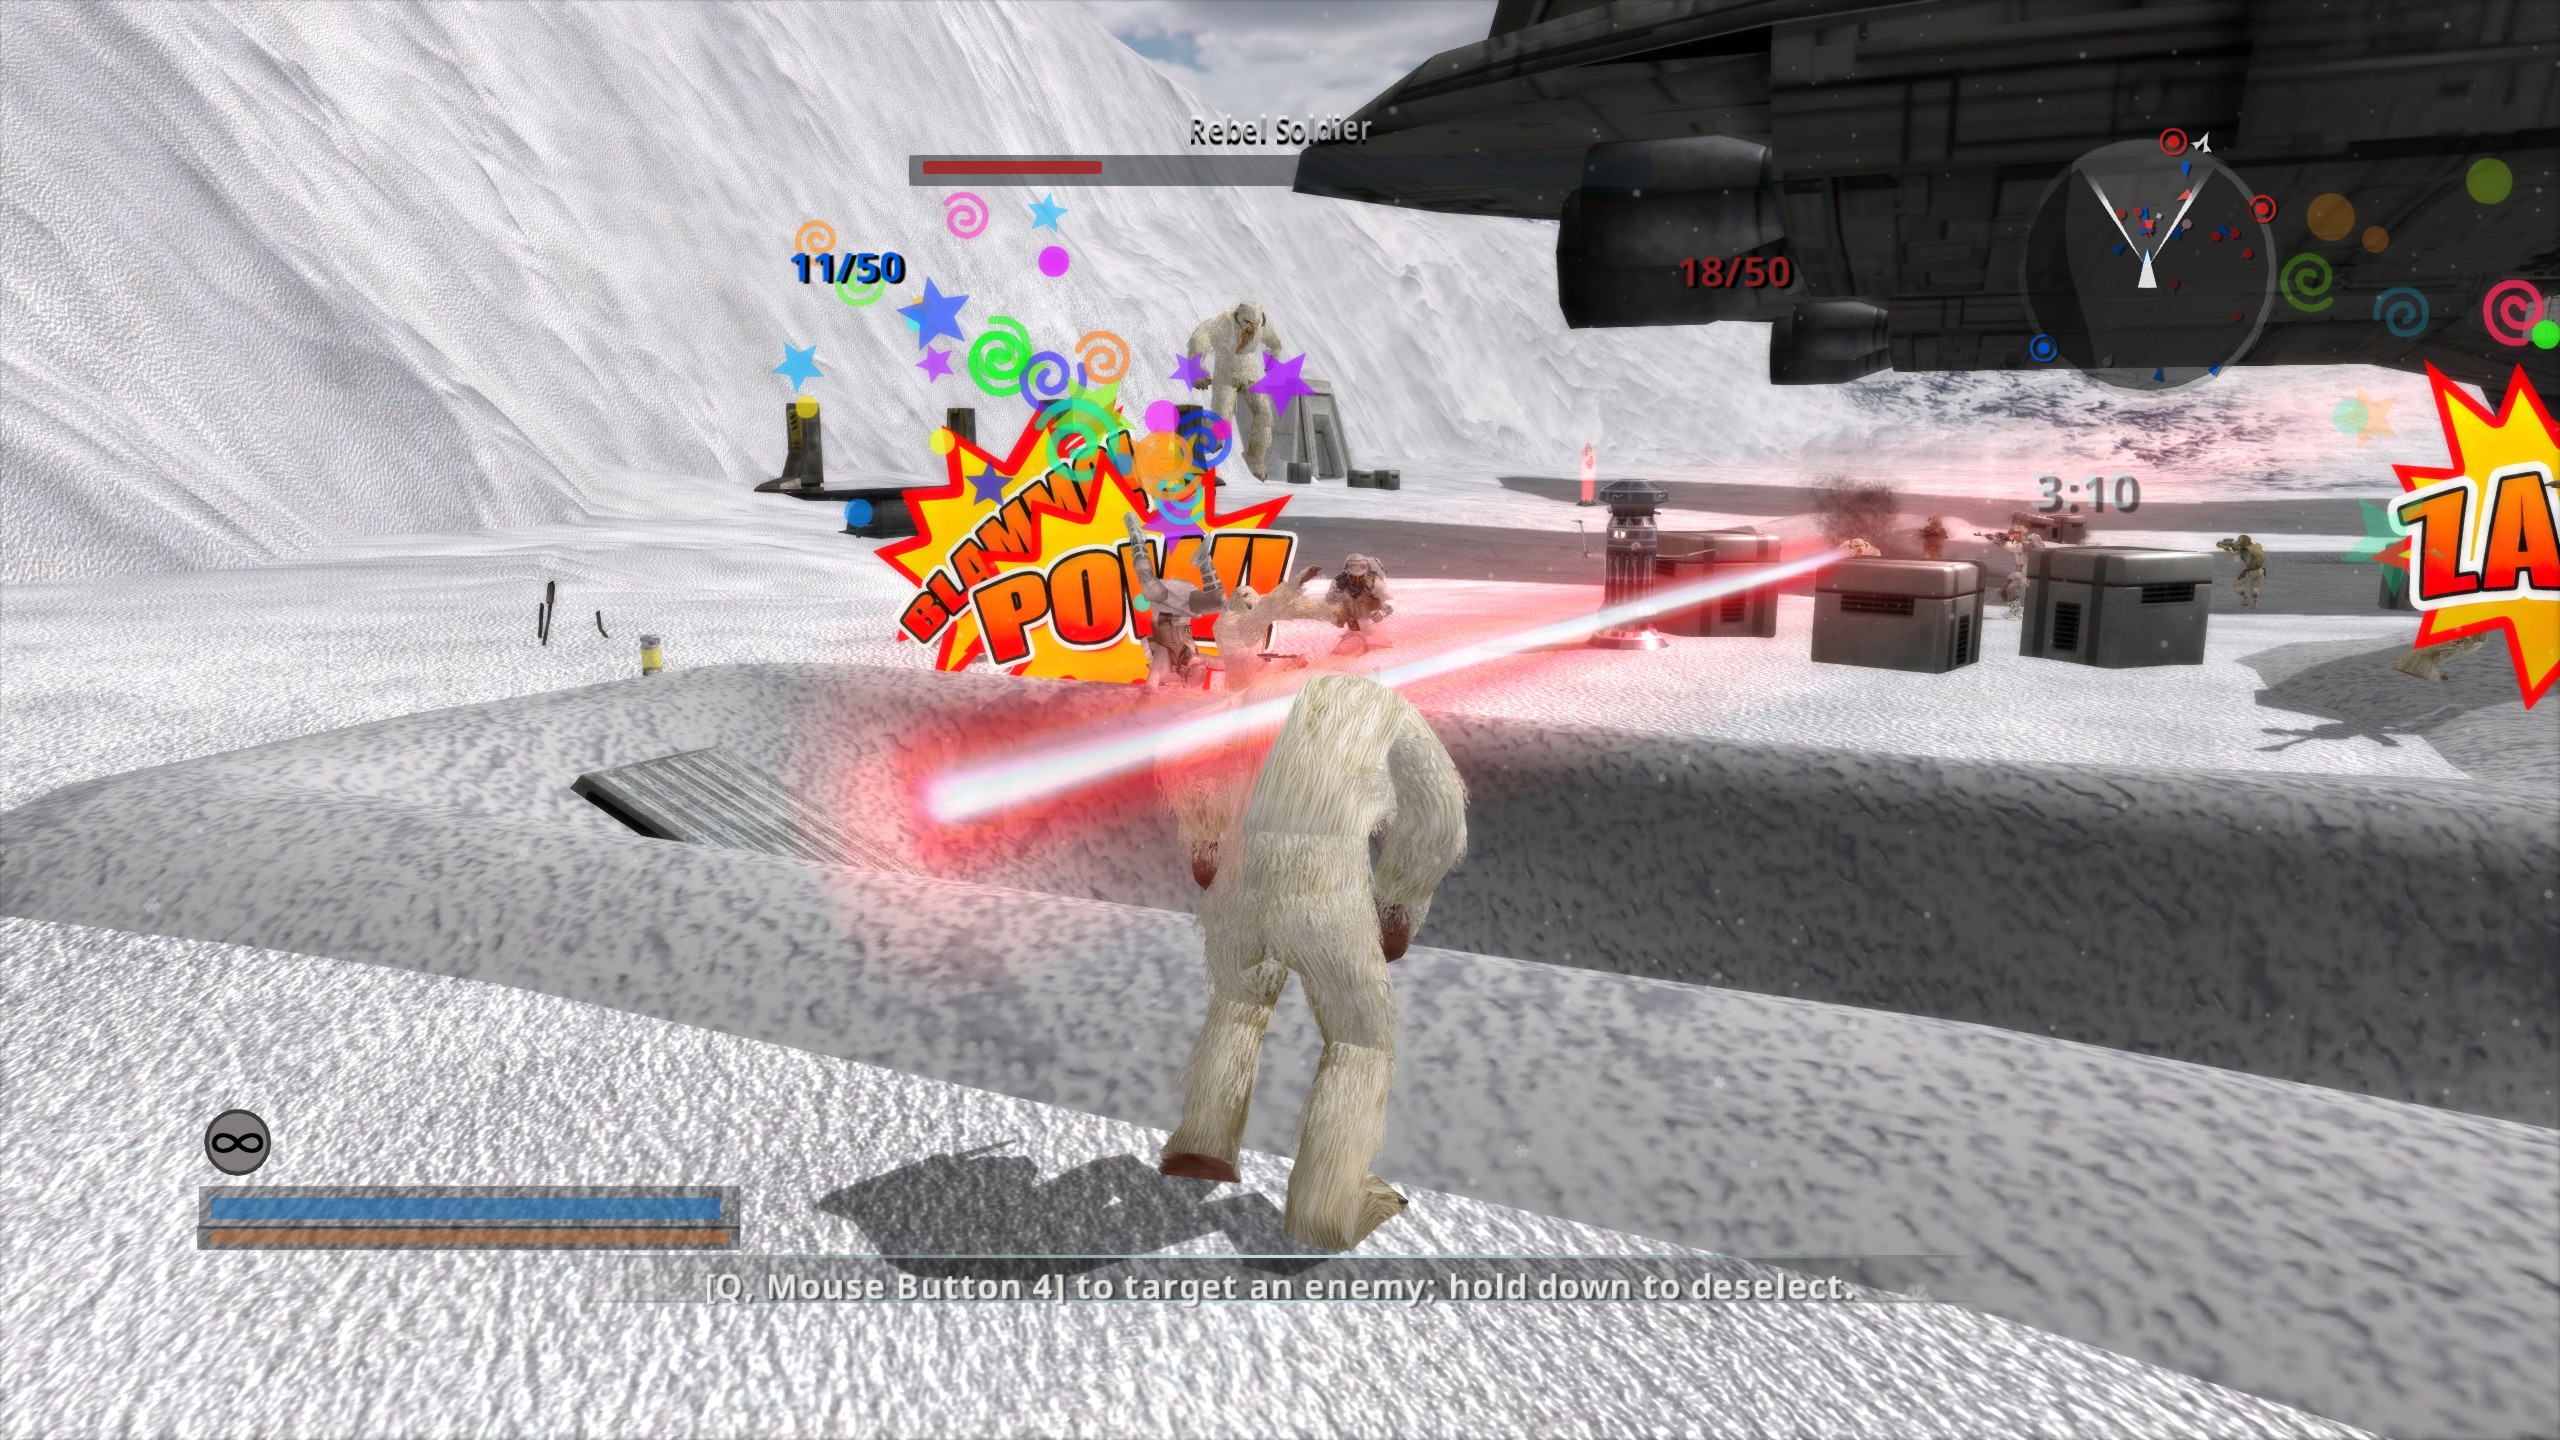 Wampas attacking Rebel soldiers in Star Wars Battlefront Classic